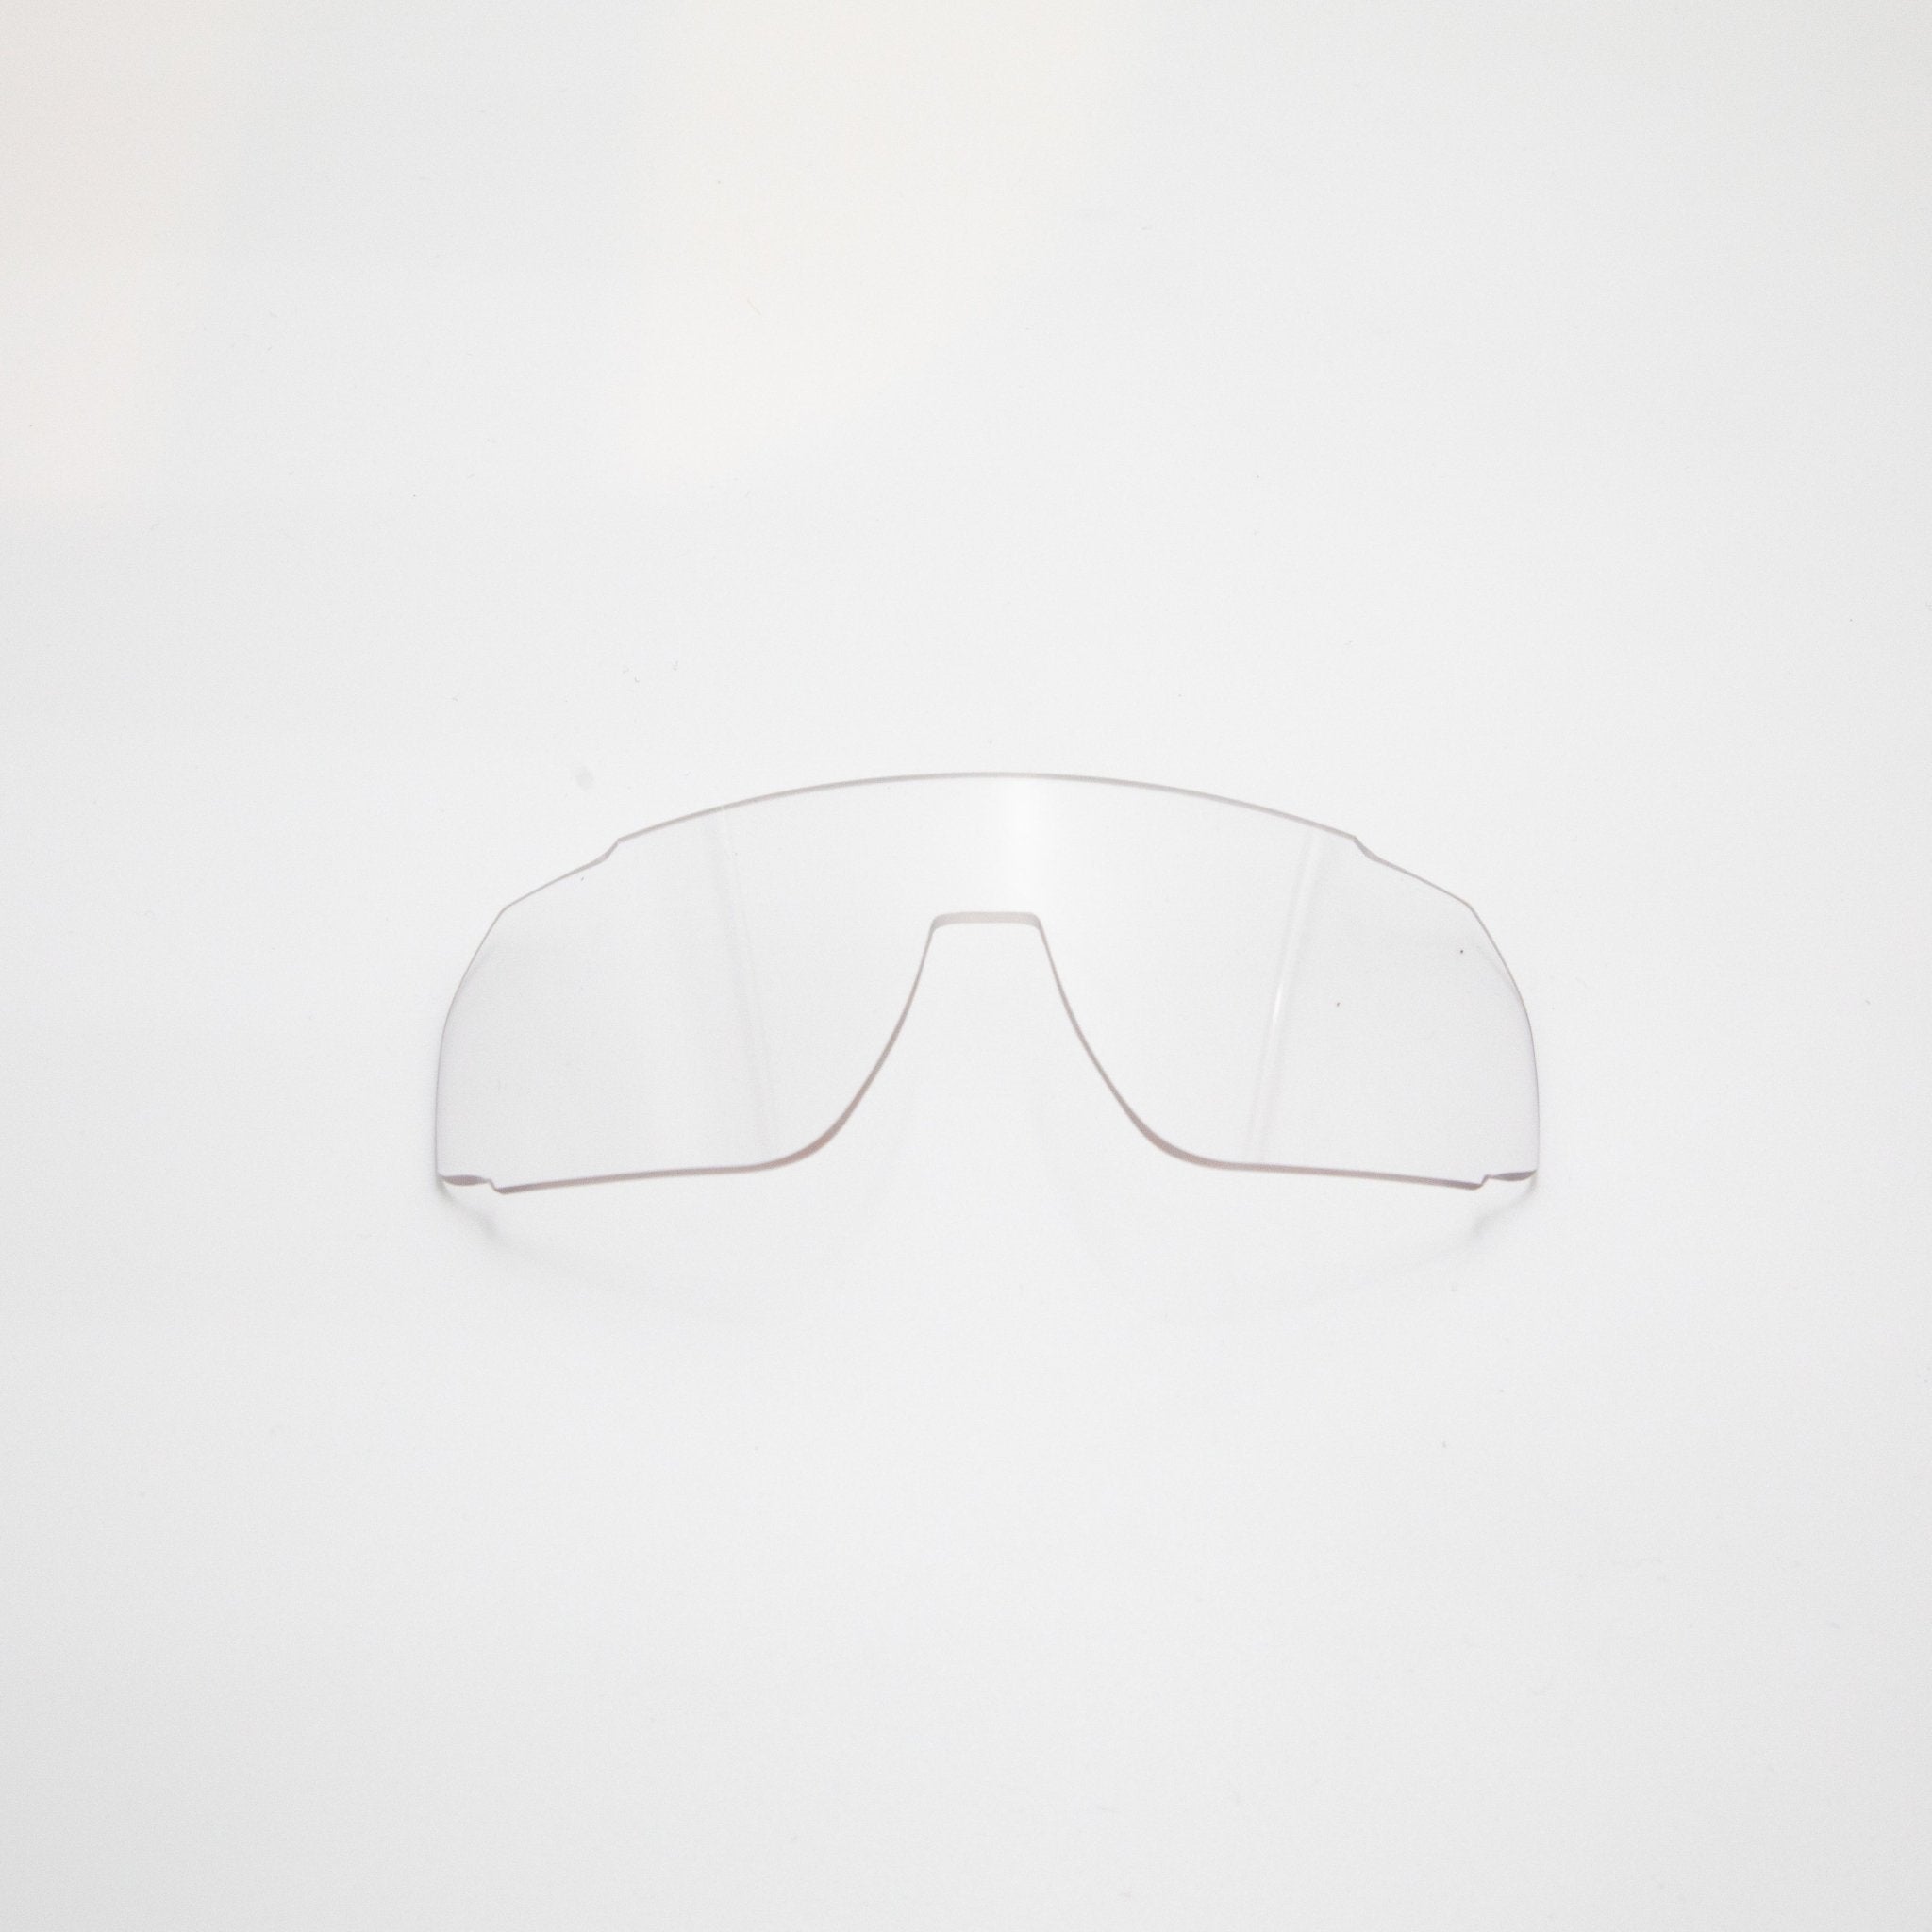 Accomplice Sunglasses - Spare Clear Lens - Teton Gravity Research